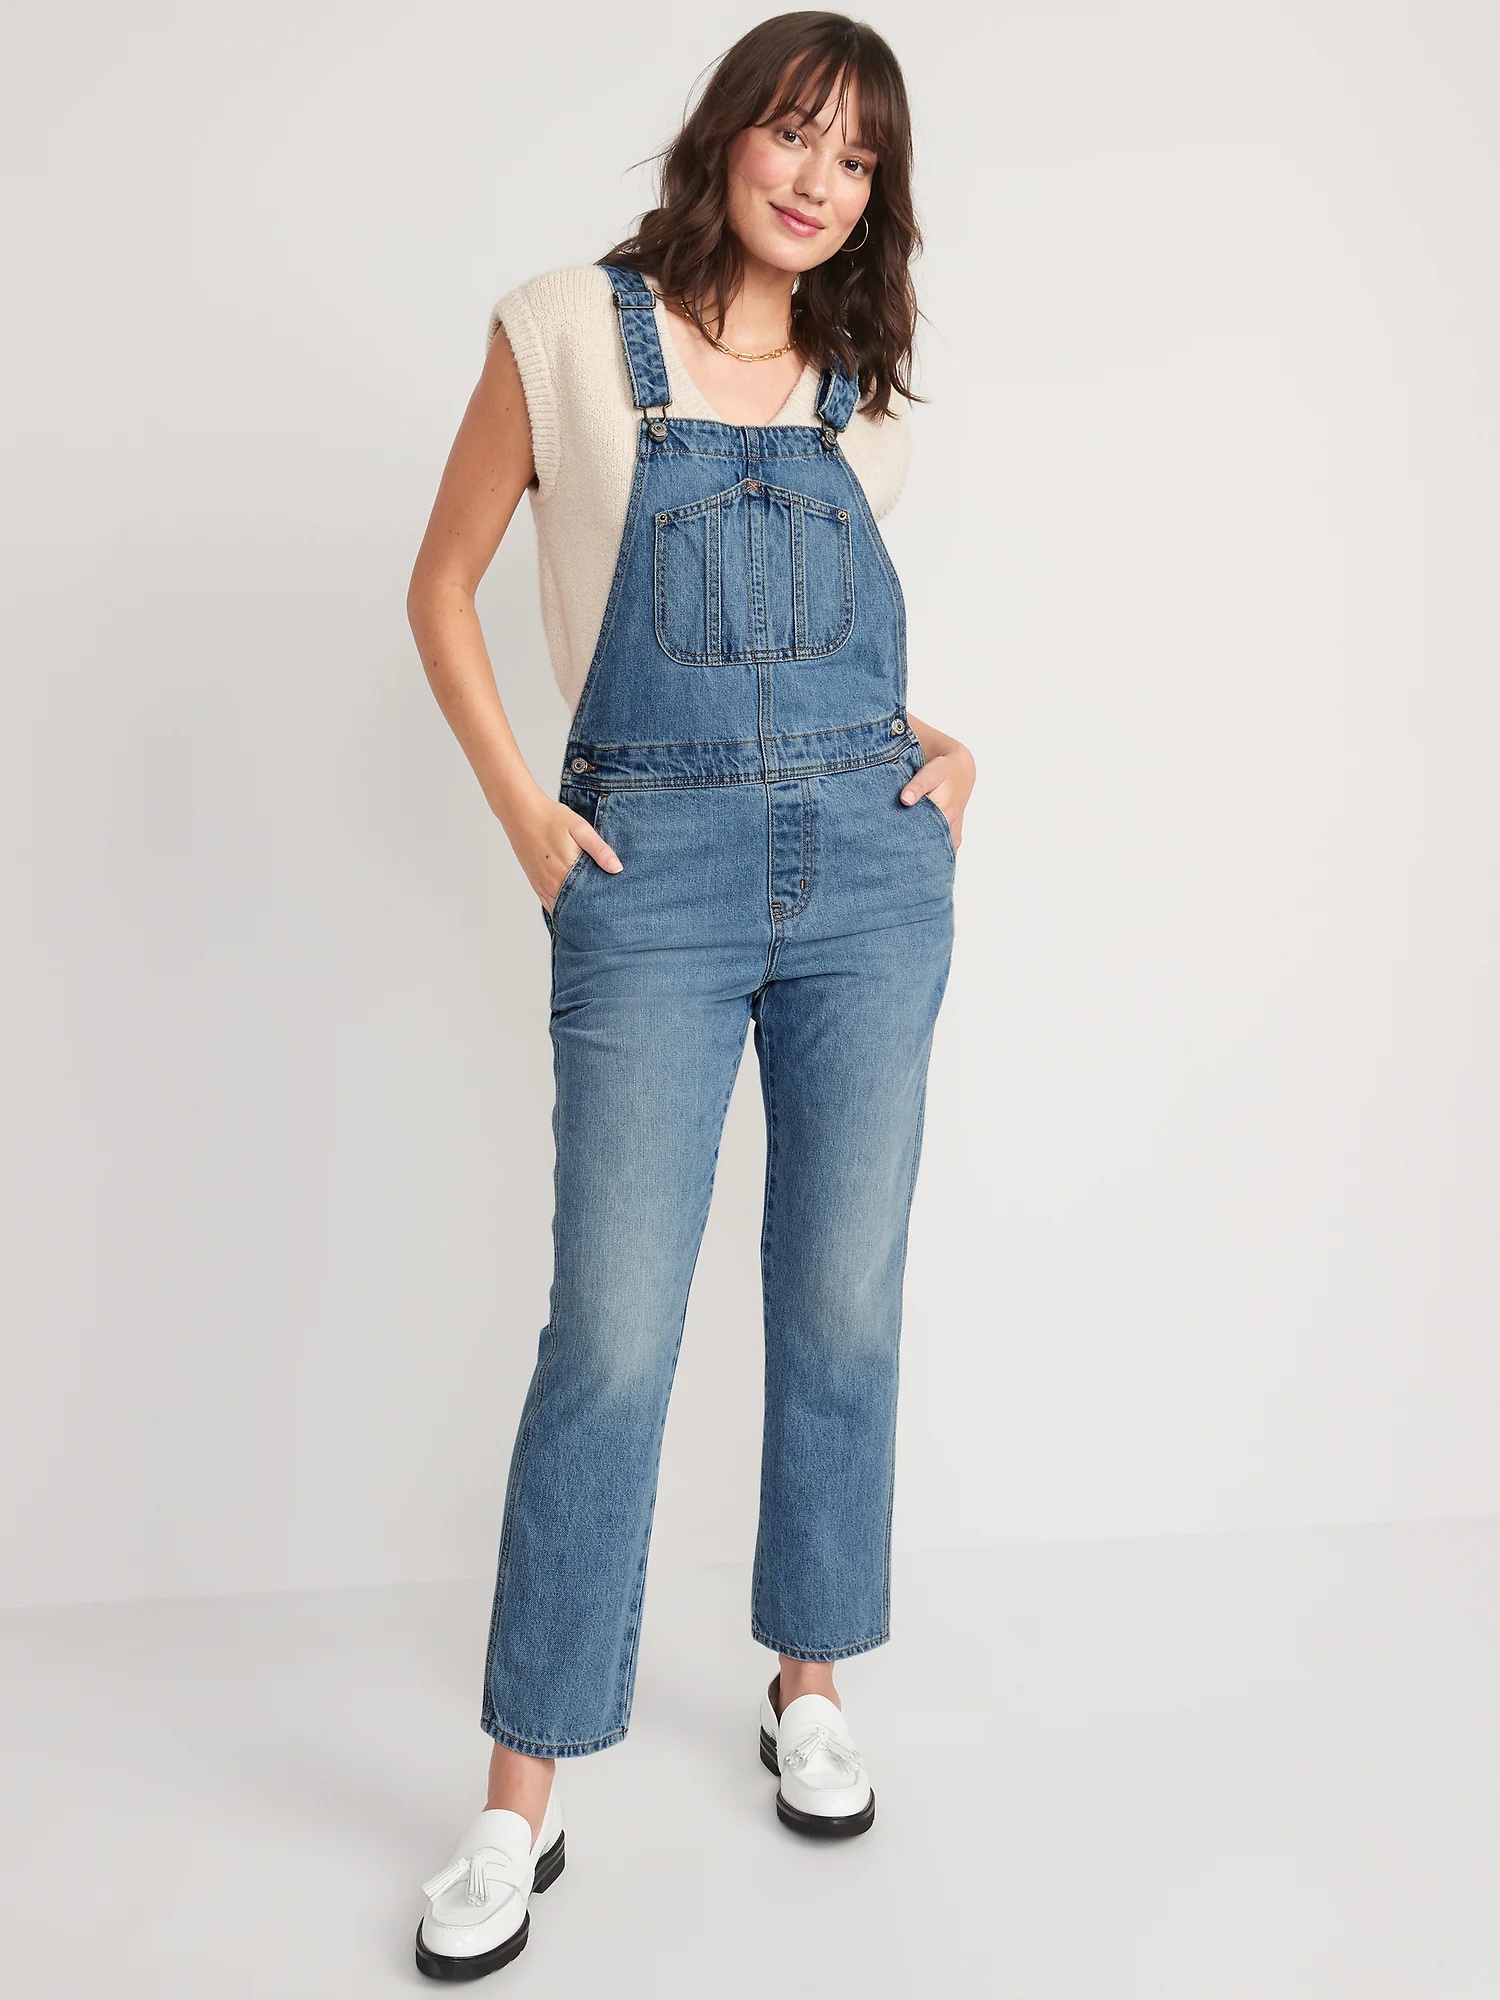 Hawx Men's Stretch Denim Bib Overalls - Country Outfitter